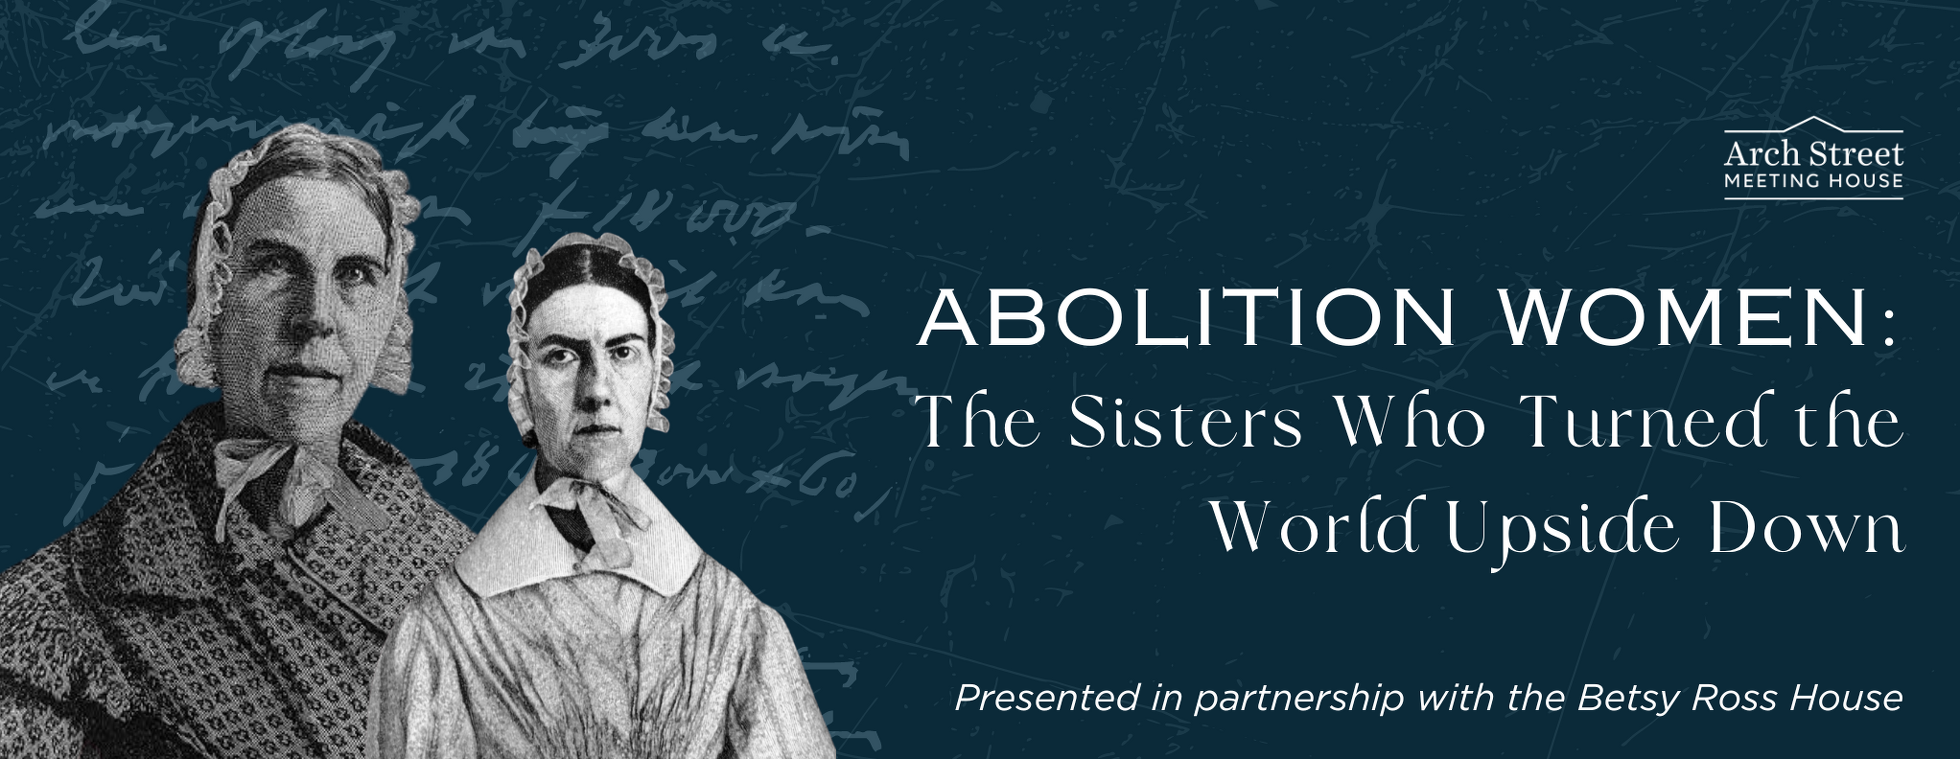 Abolition Women: The Sisters Who Turned the World Upside Down